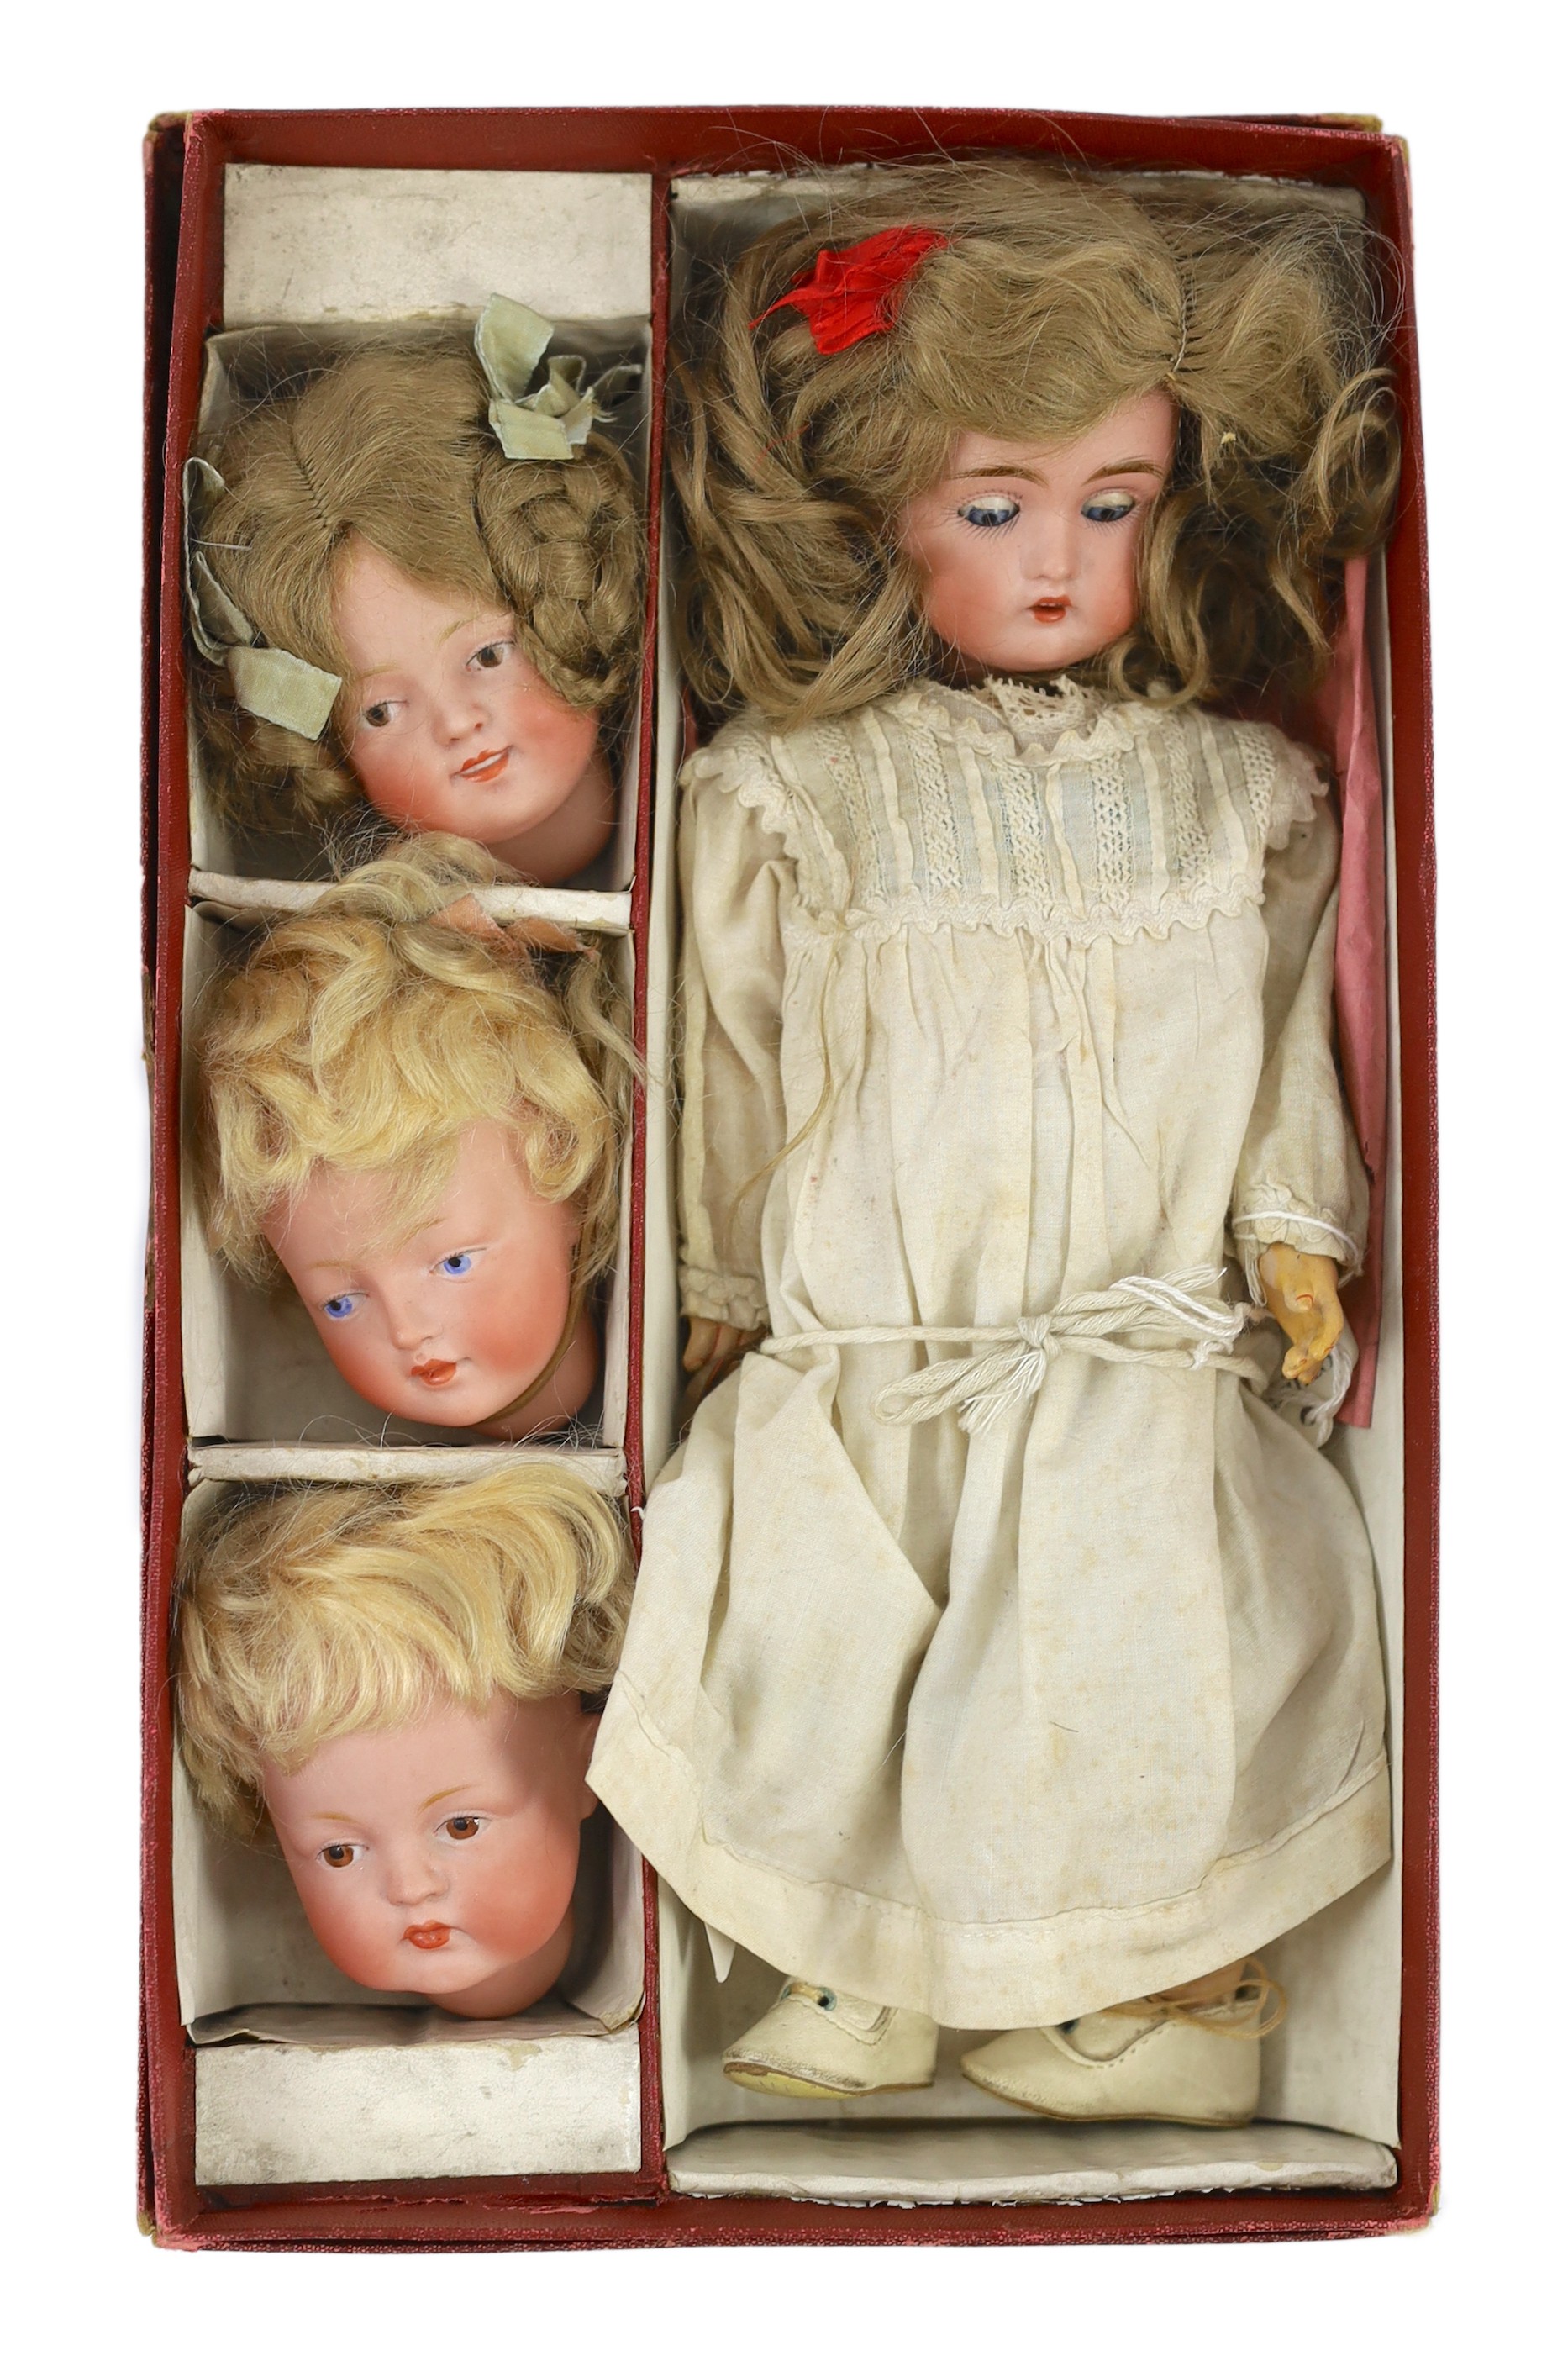 A rare J. D. Kestner bisque character doll, with three interchangeable character heads, German, circa 1910, overall 28cm high, retaining original instructions of how to change heads and the original box